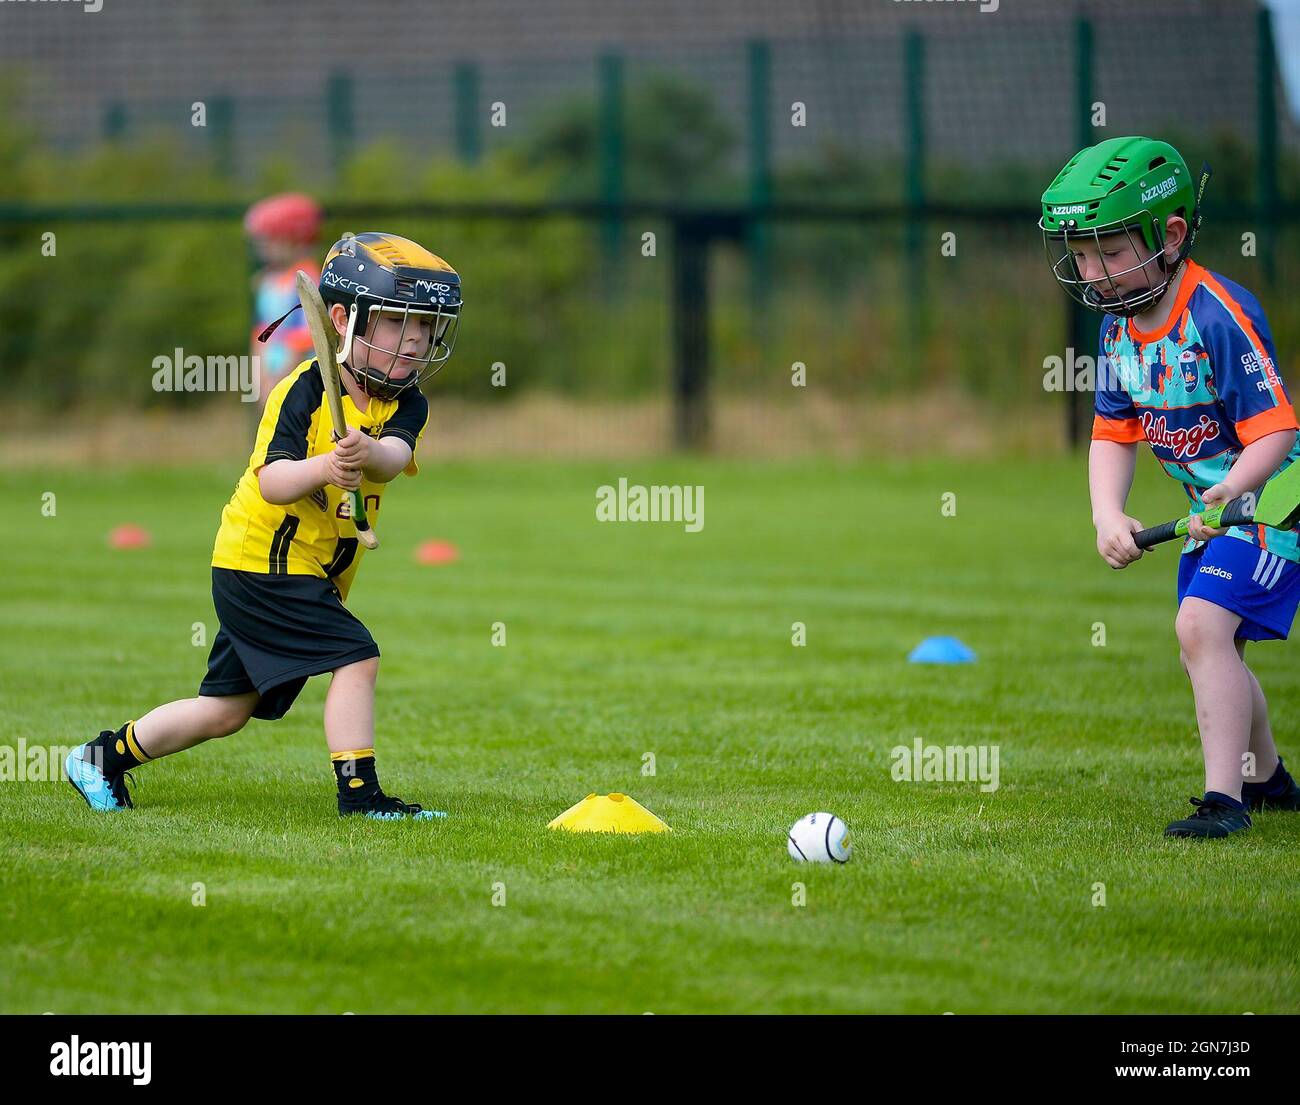 Children at GAA hurling Cul camp in Derry, Northern Ireland. ©George Sweeney / Alamy Stock Photo Stock Photo